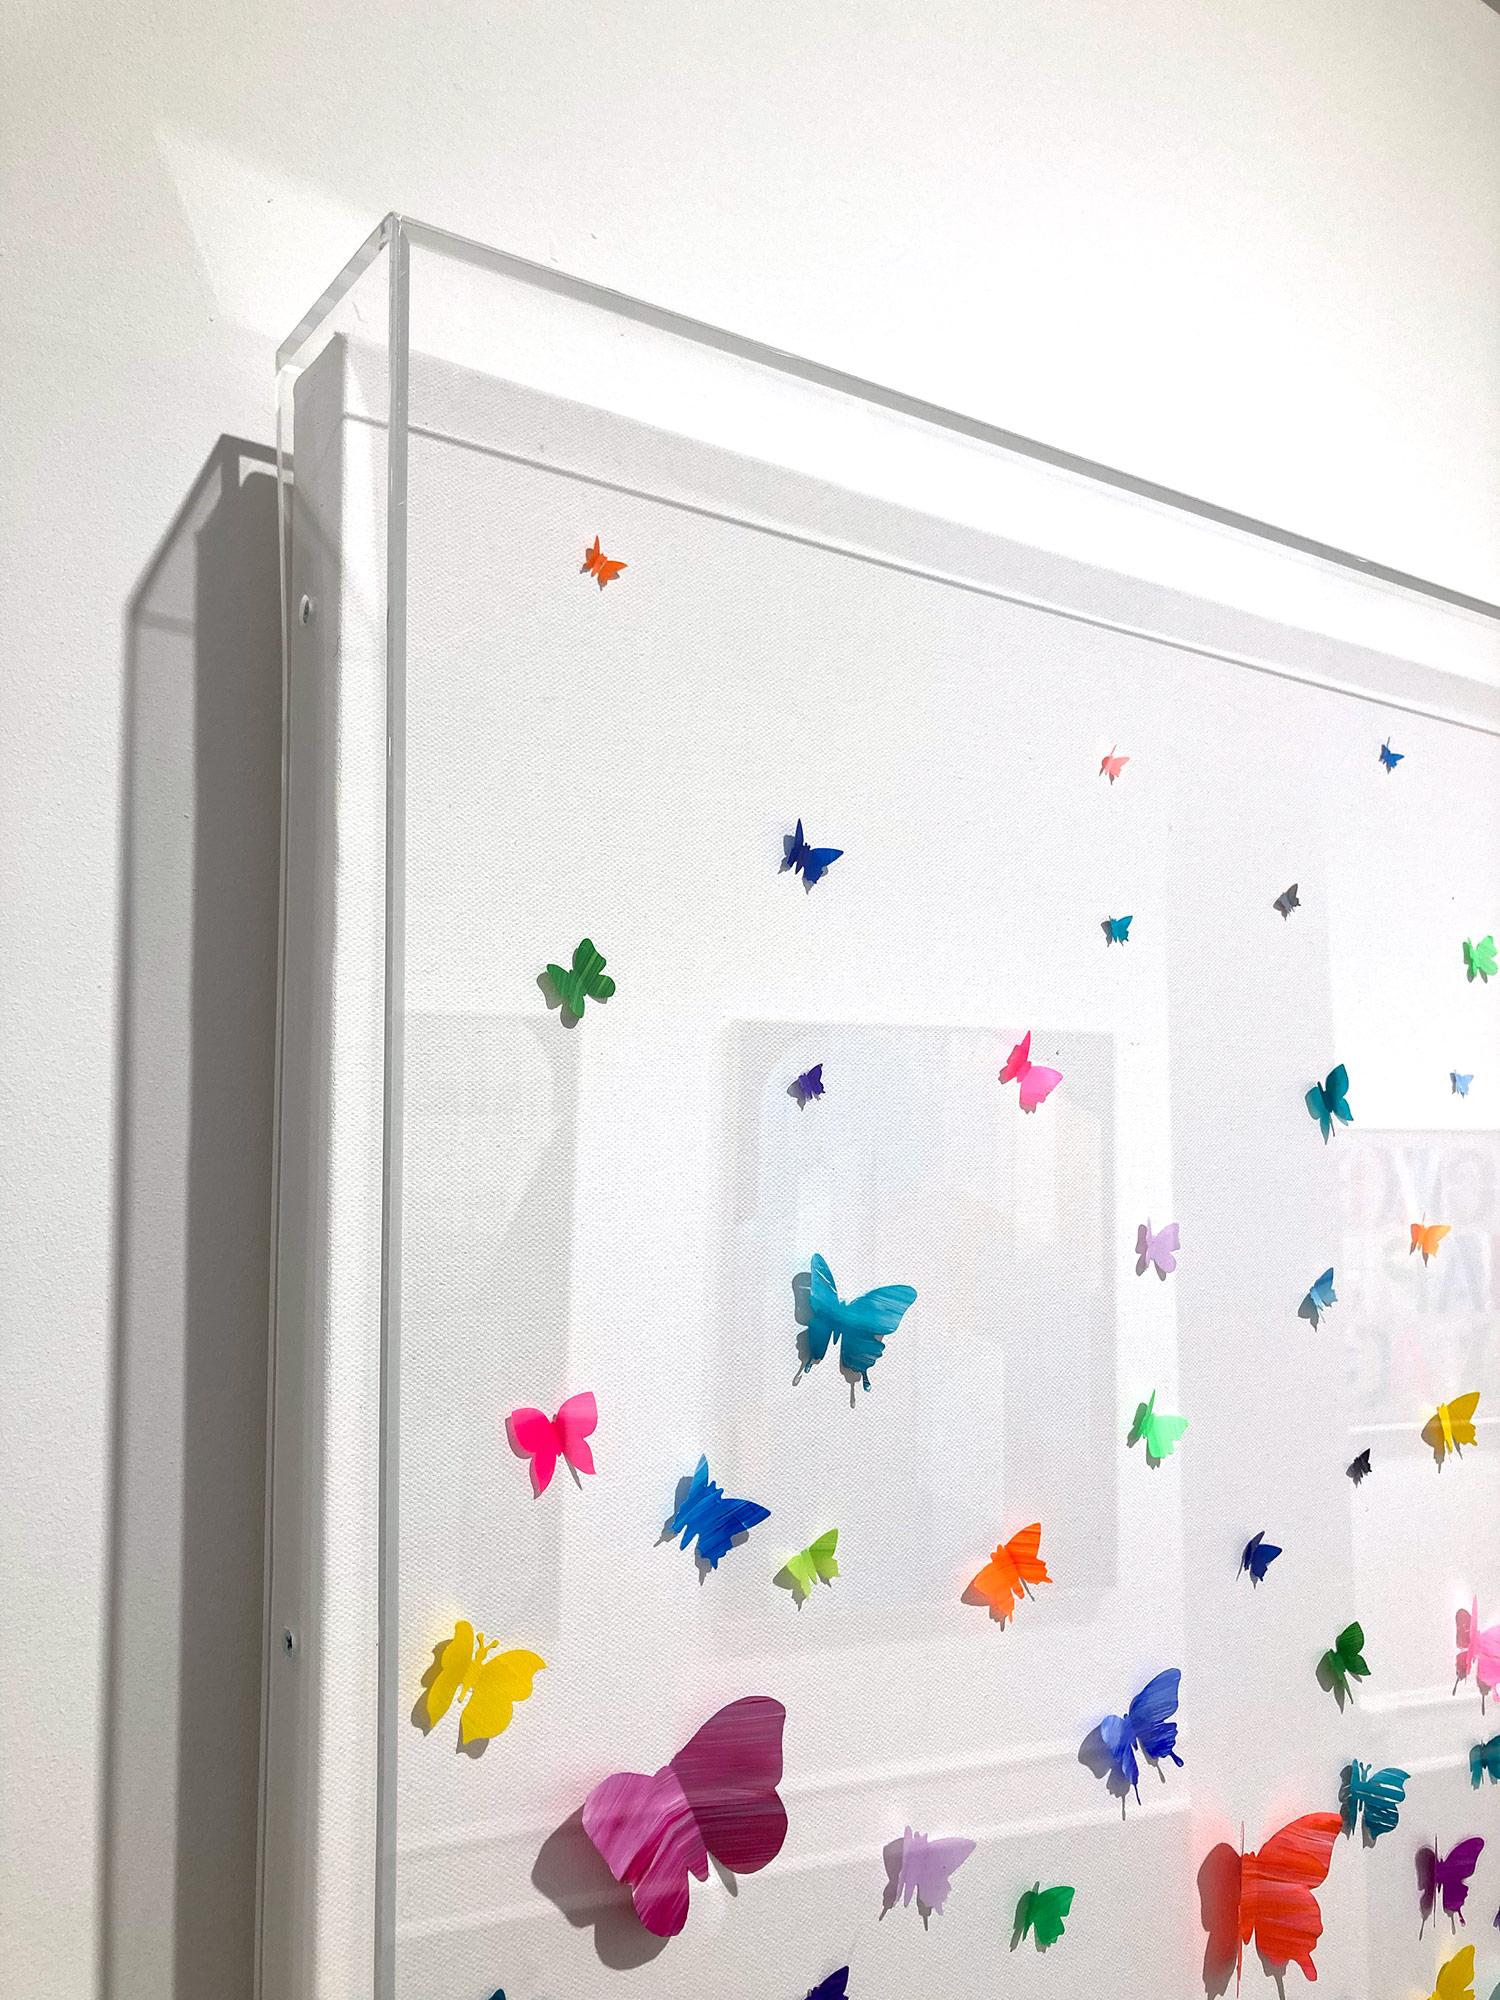 This piece is executed with hand cut butterflies, and comes displayed in an acrylic shadow box. These works conjure sensations of nostalgia, created from paper, cutting out colorful butterflies in ascension to create feelings of unity within the